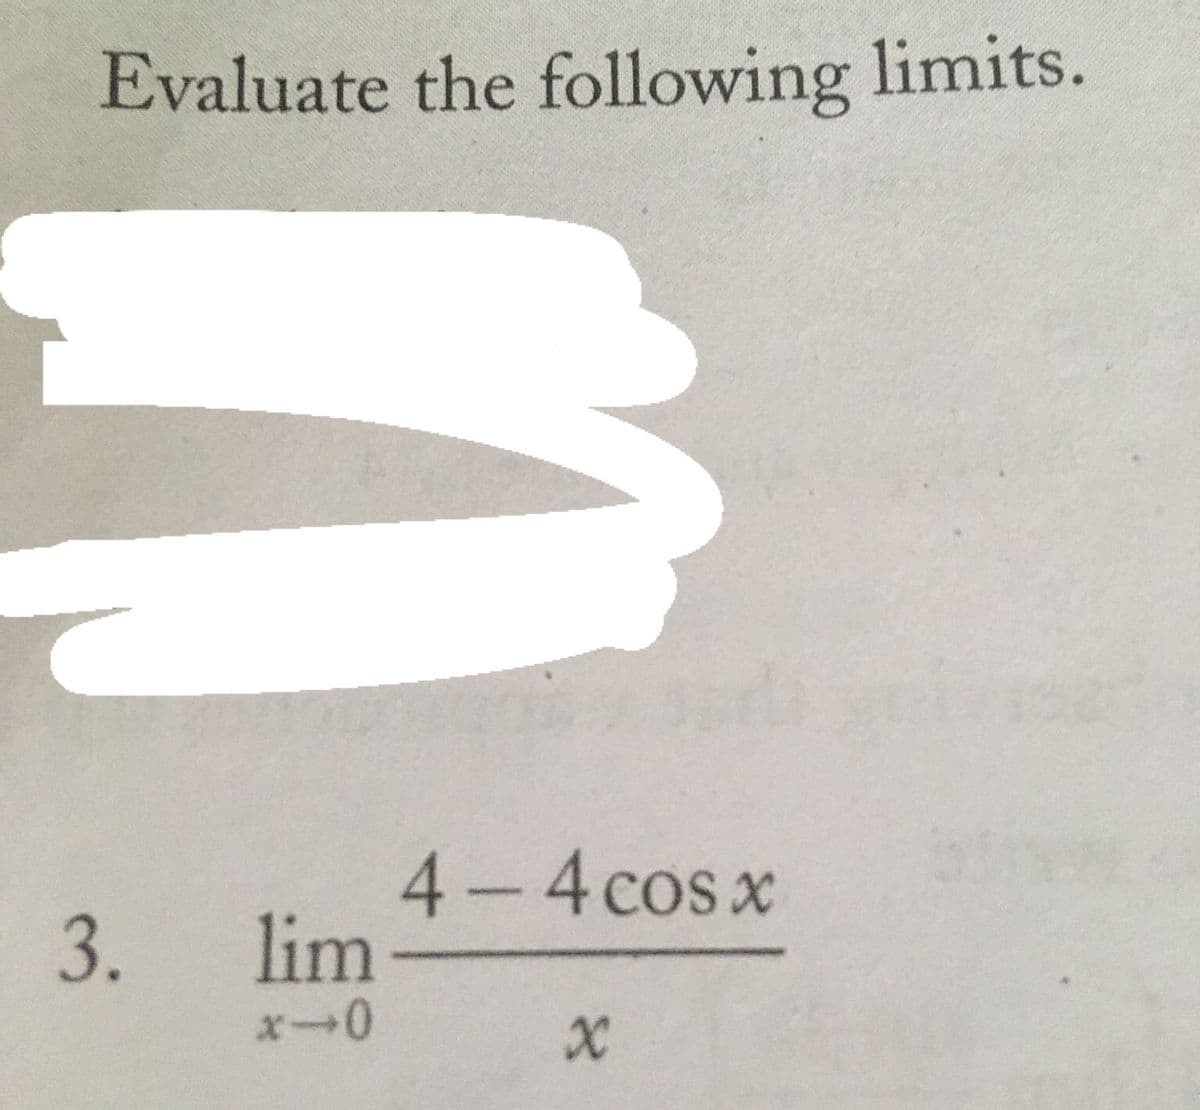 Evaluate the following limits.
4-4 cosx
lim
3.
